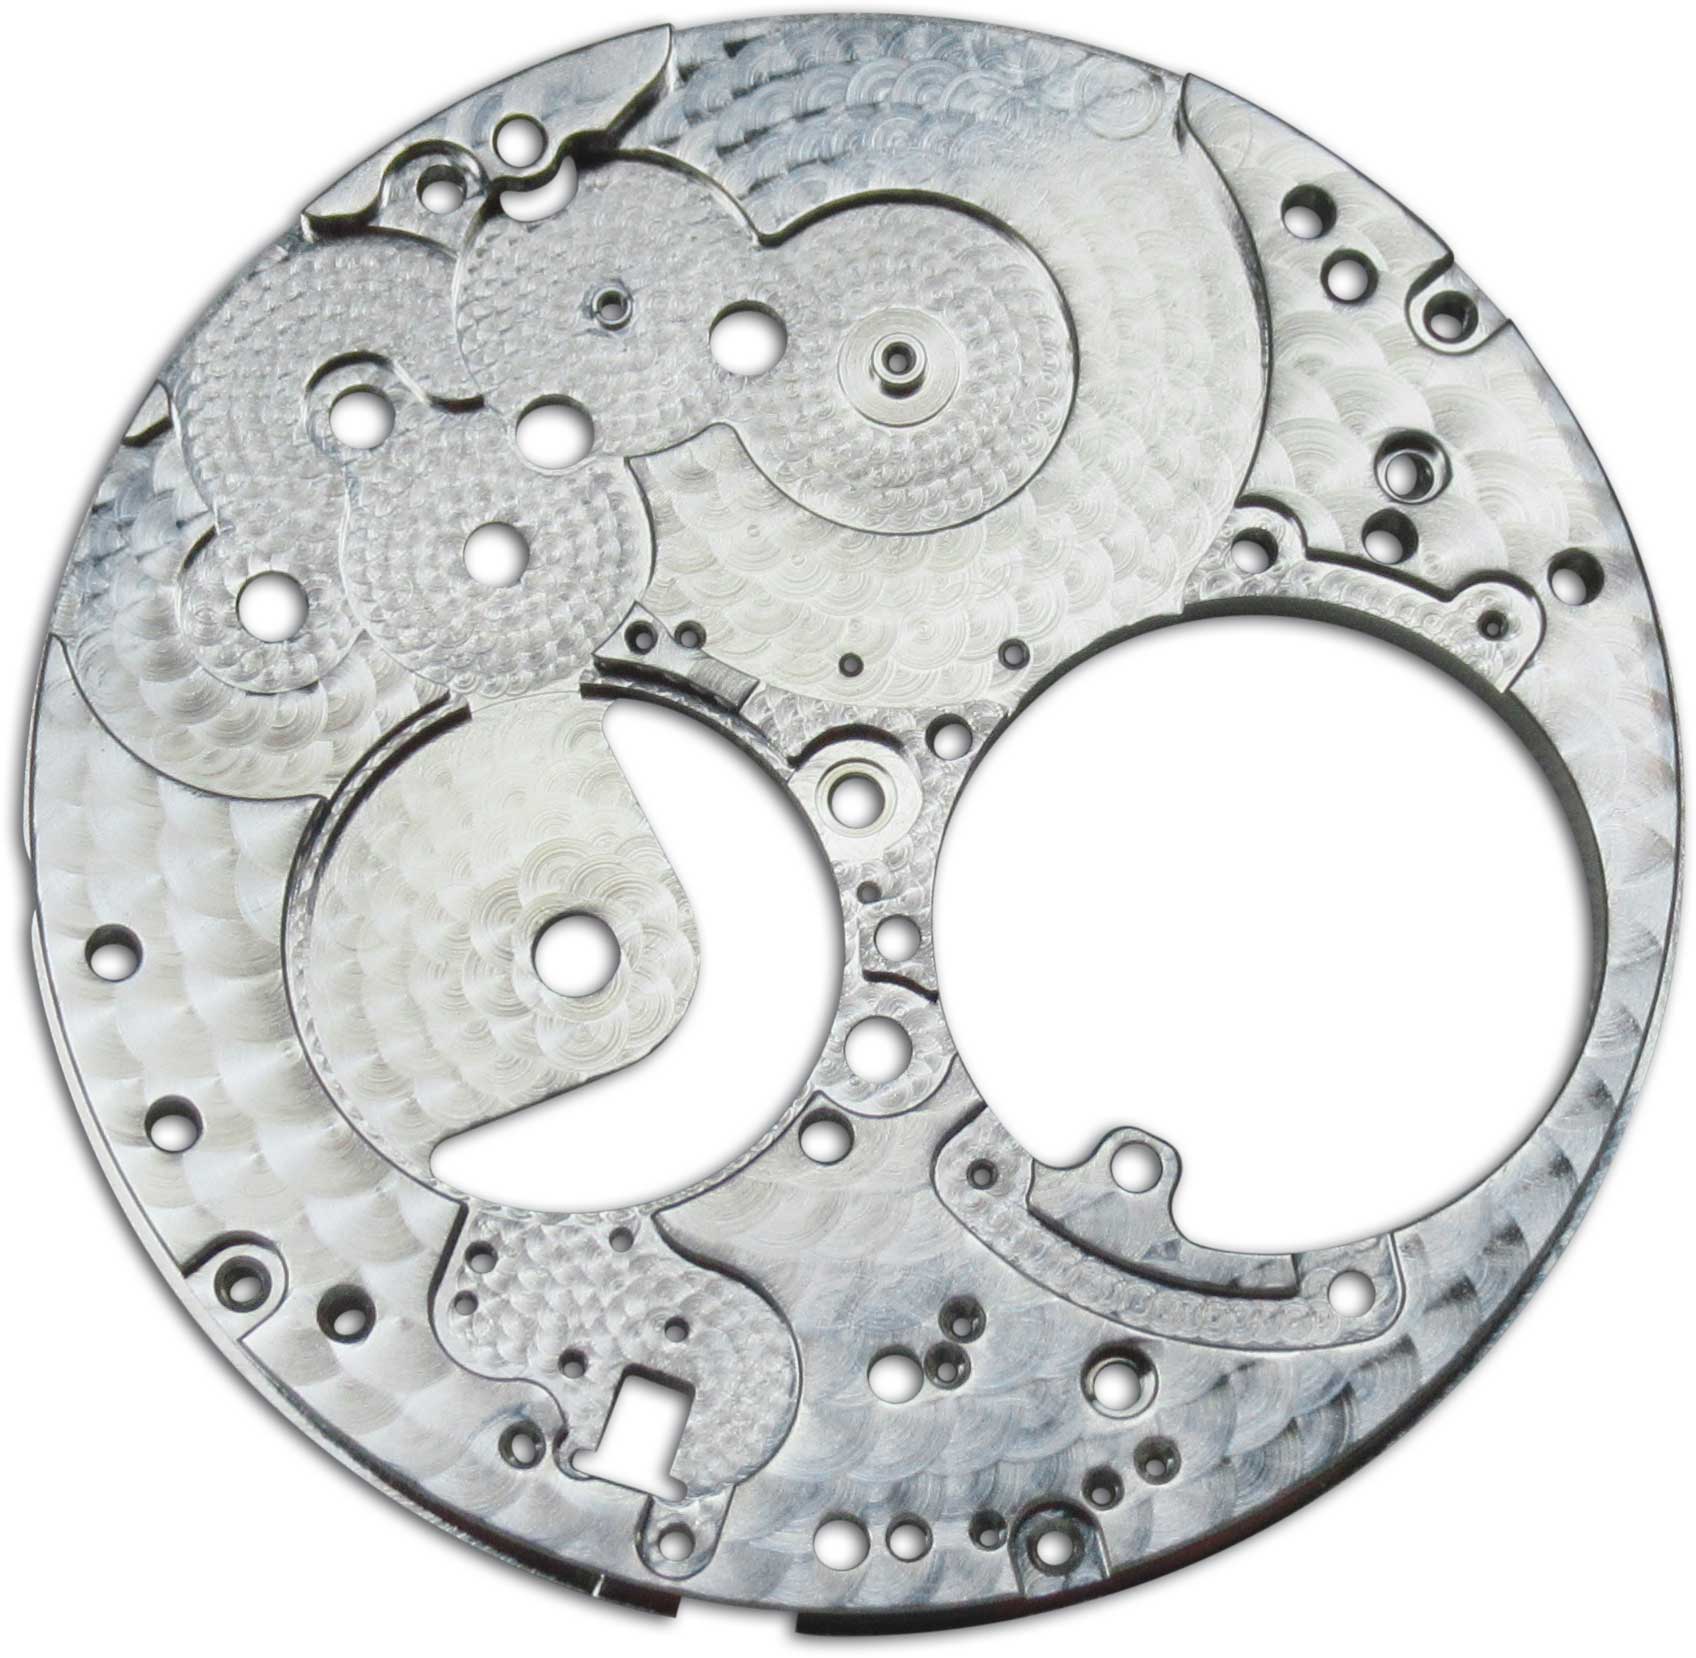 Decoratively machined pearl-effect platelet for a movement